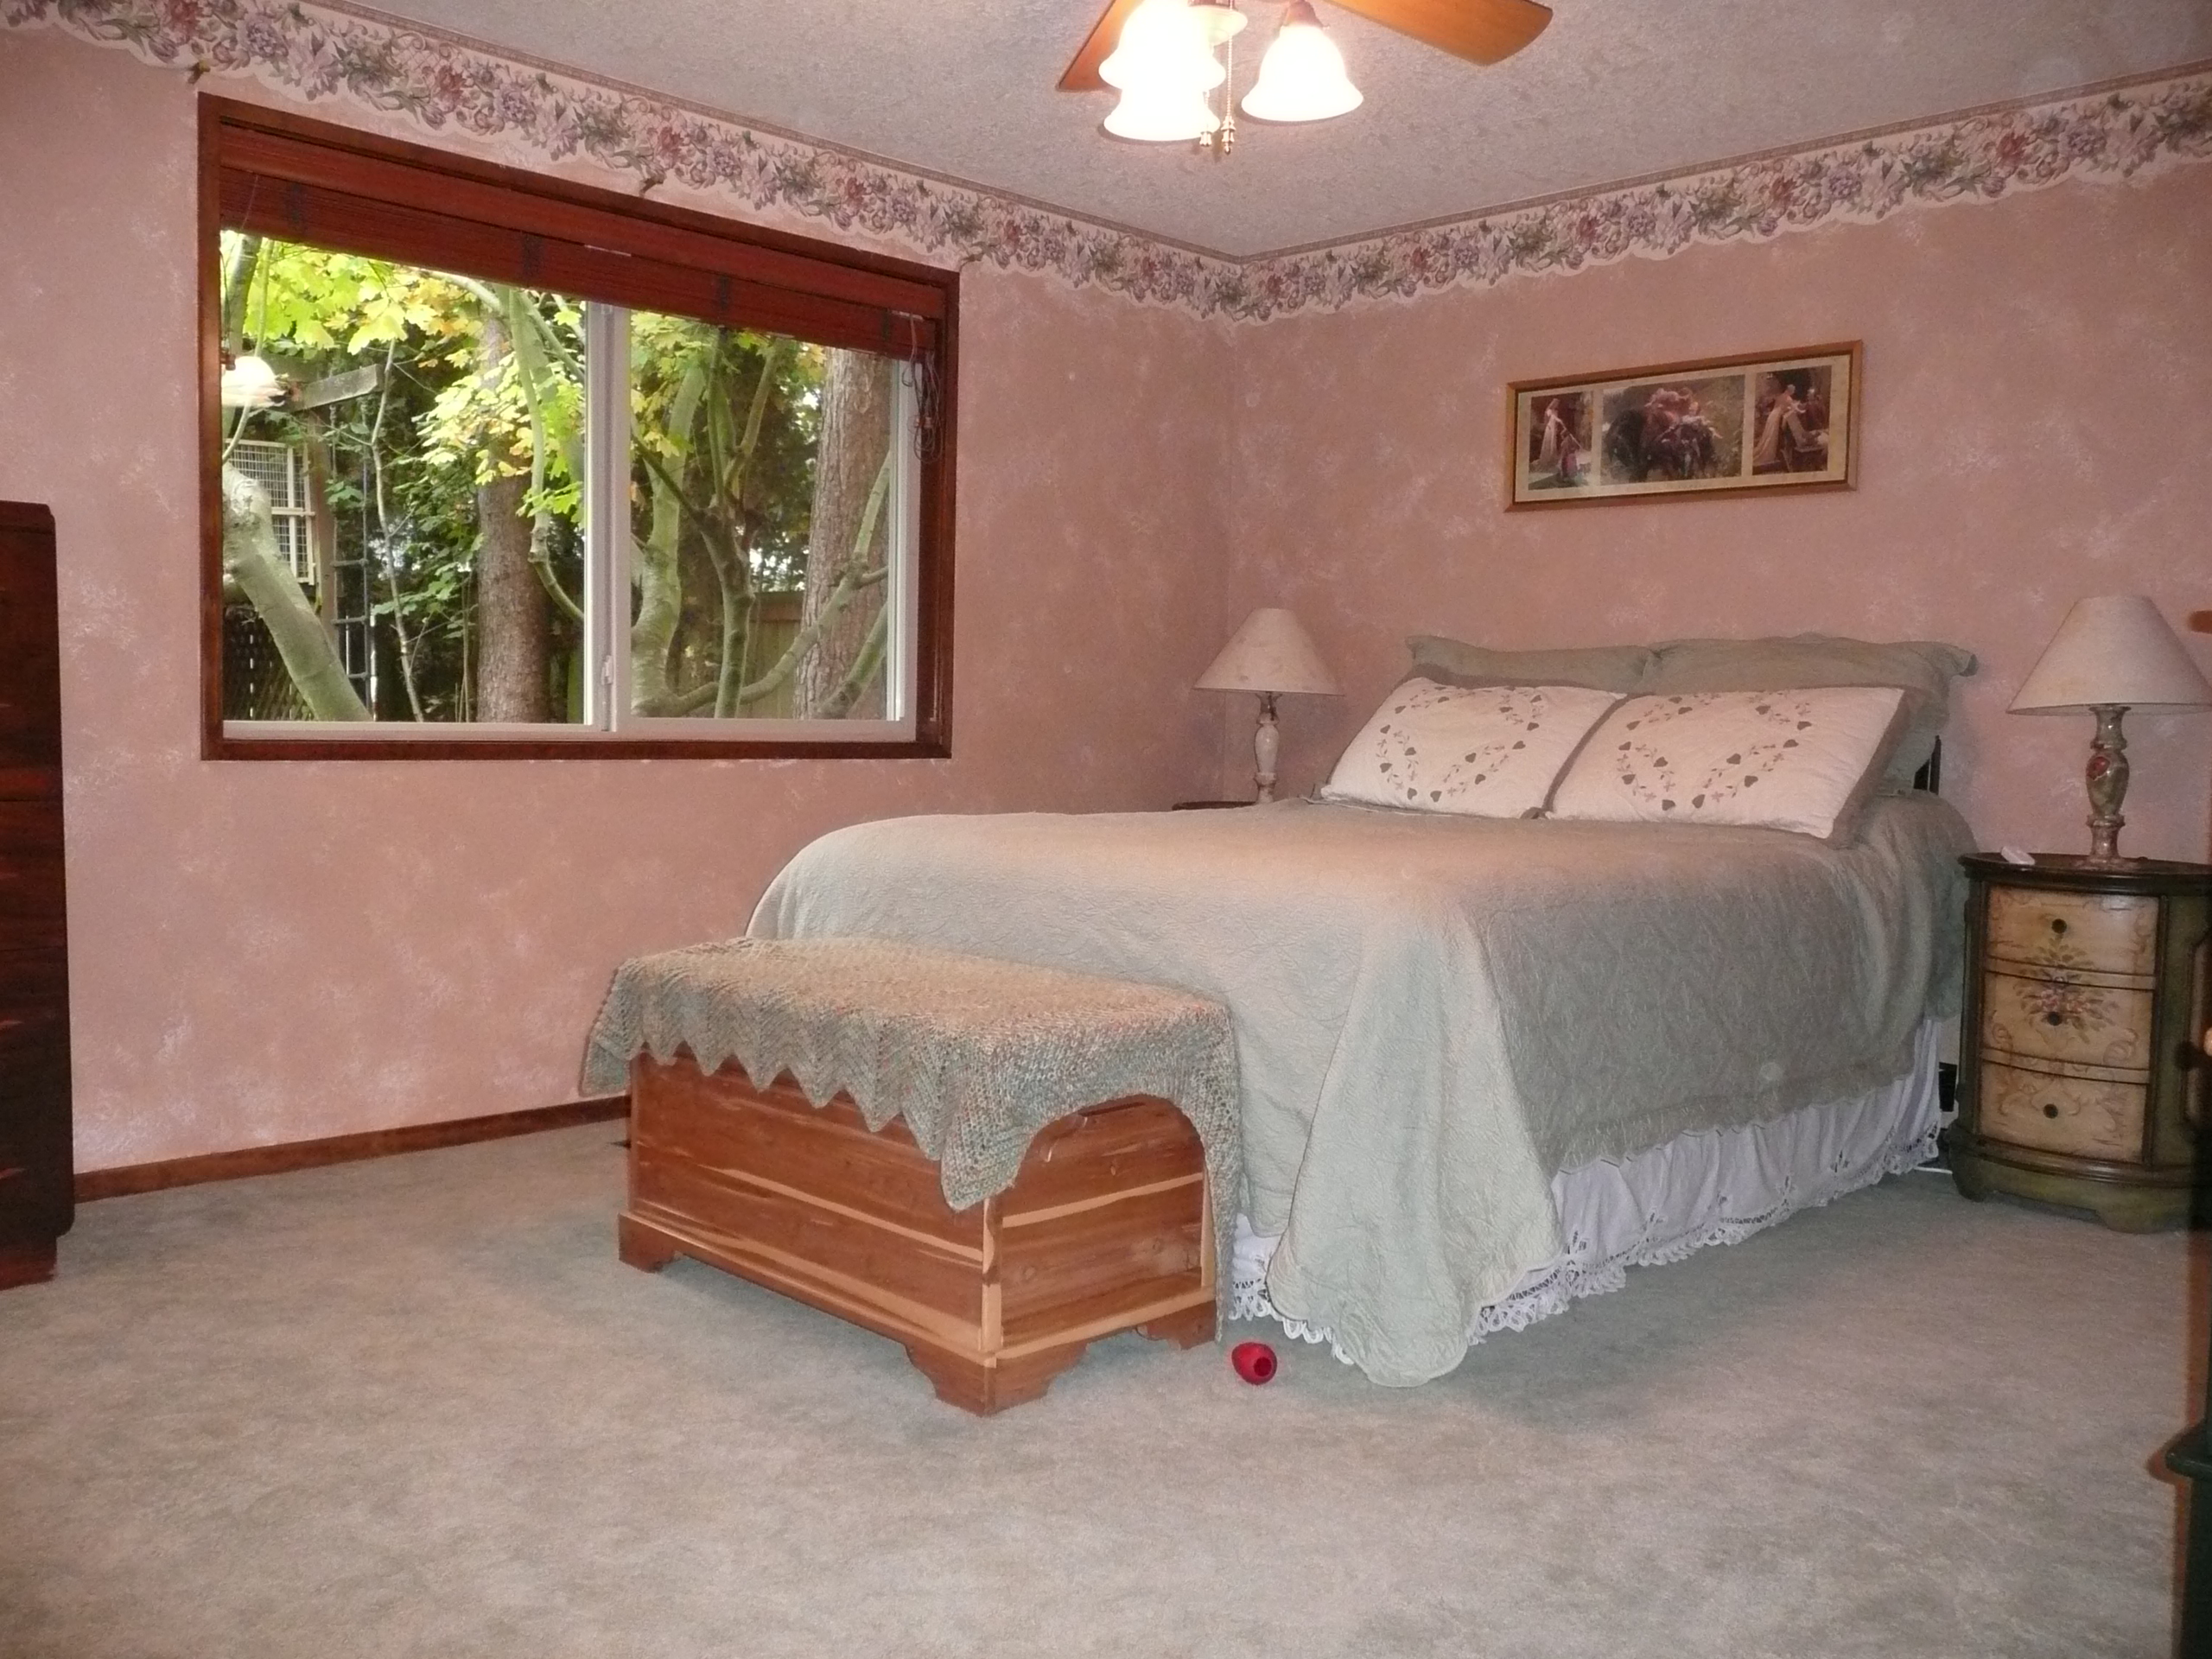 Master bedroom before staging consultation